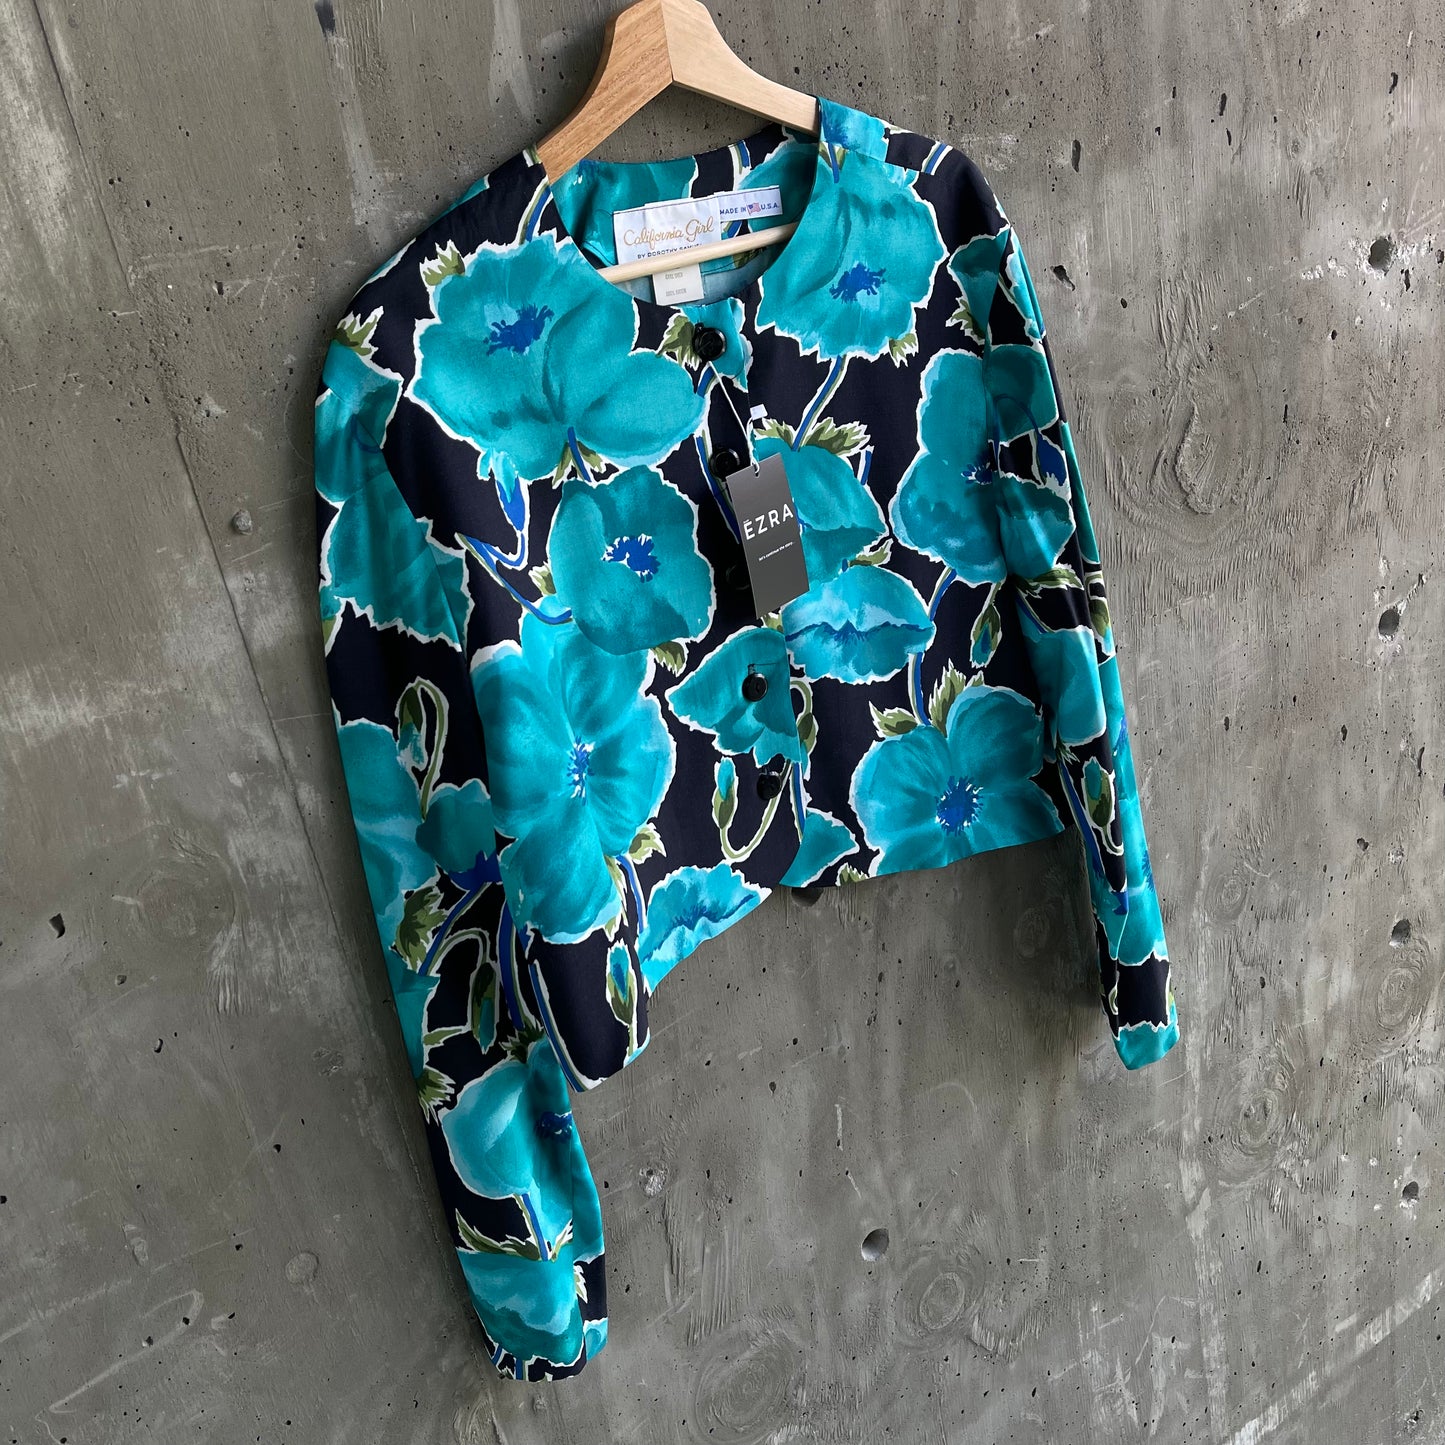 Vintage 70’s Floral Top by California Girl